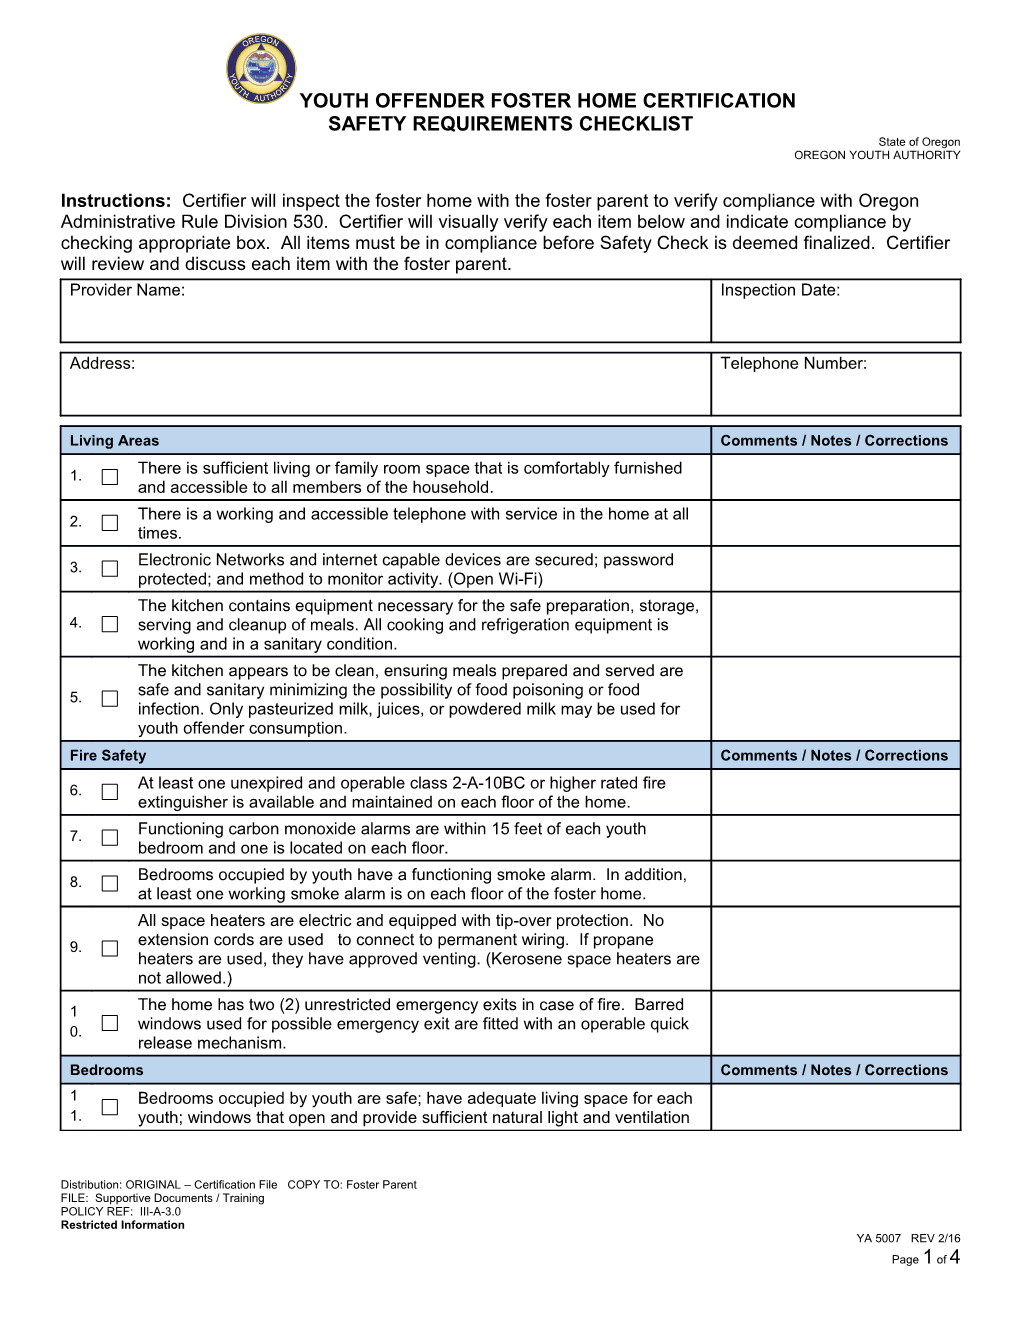 YA 5007 - Youth Offender Foster Home Certification Safety Requirement Checklist